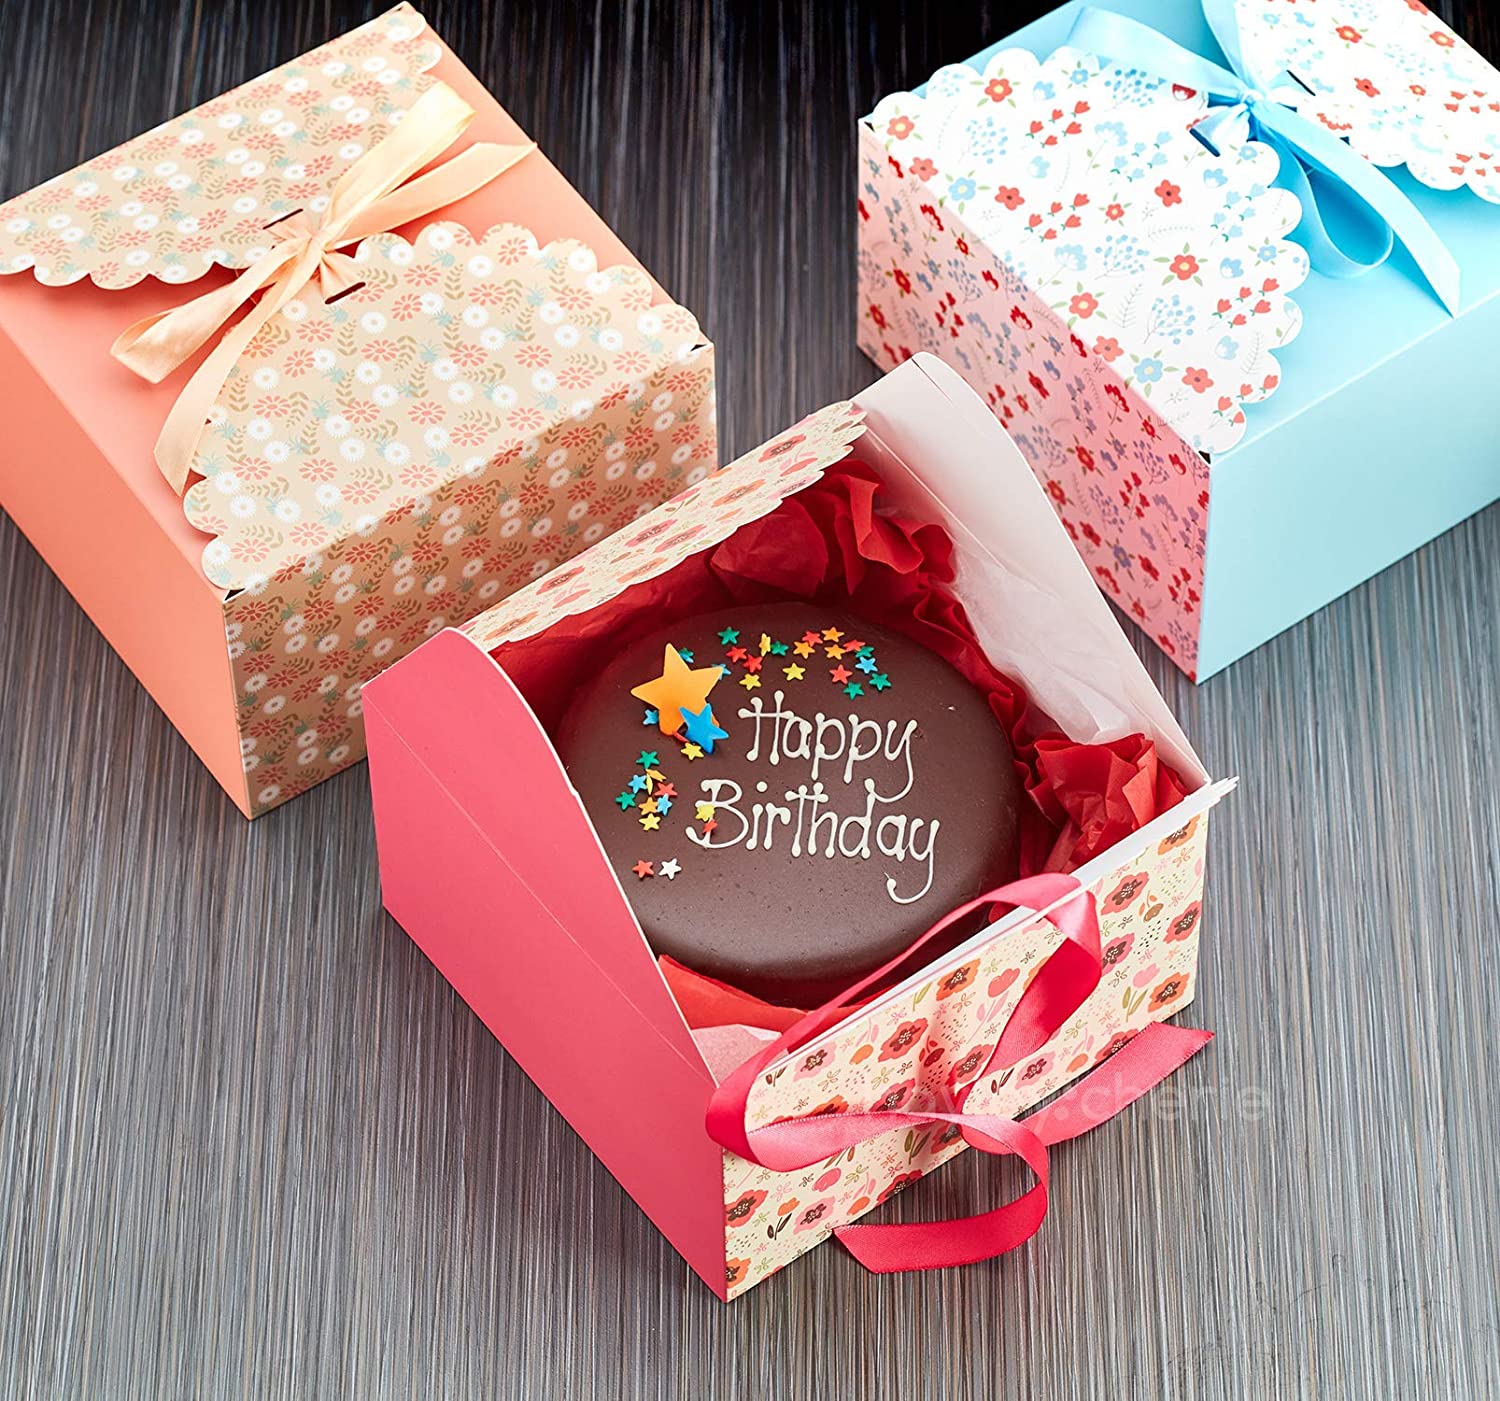 20+ Gift Box Free Photos and Images